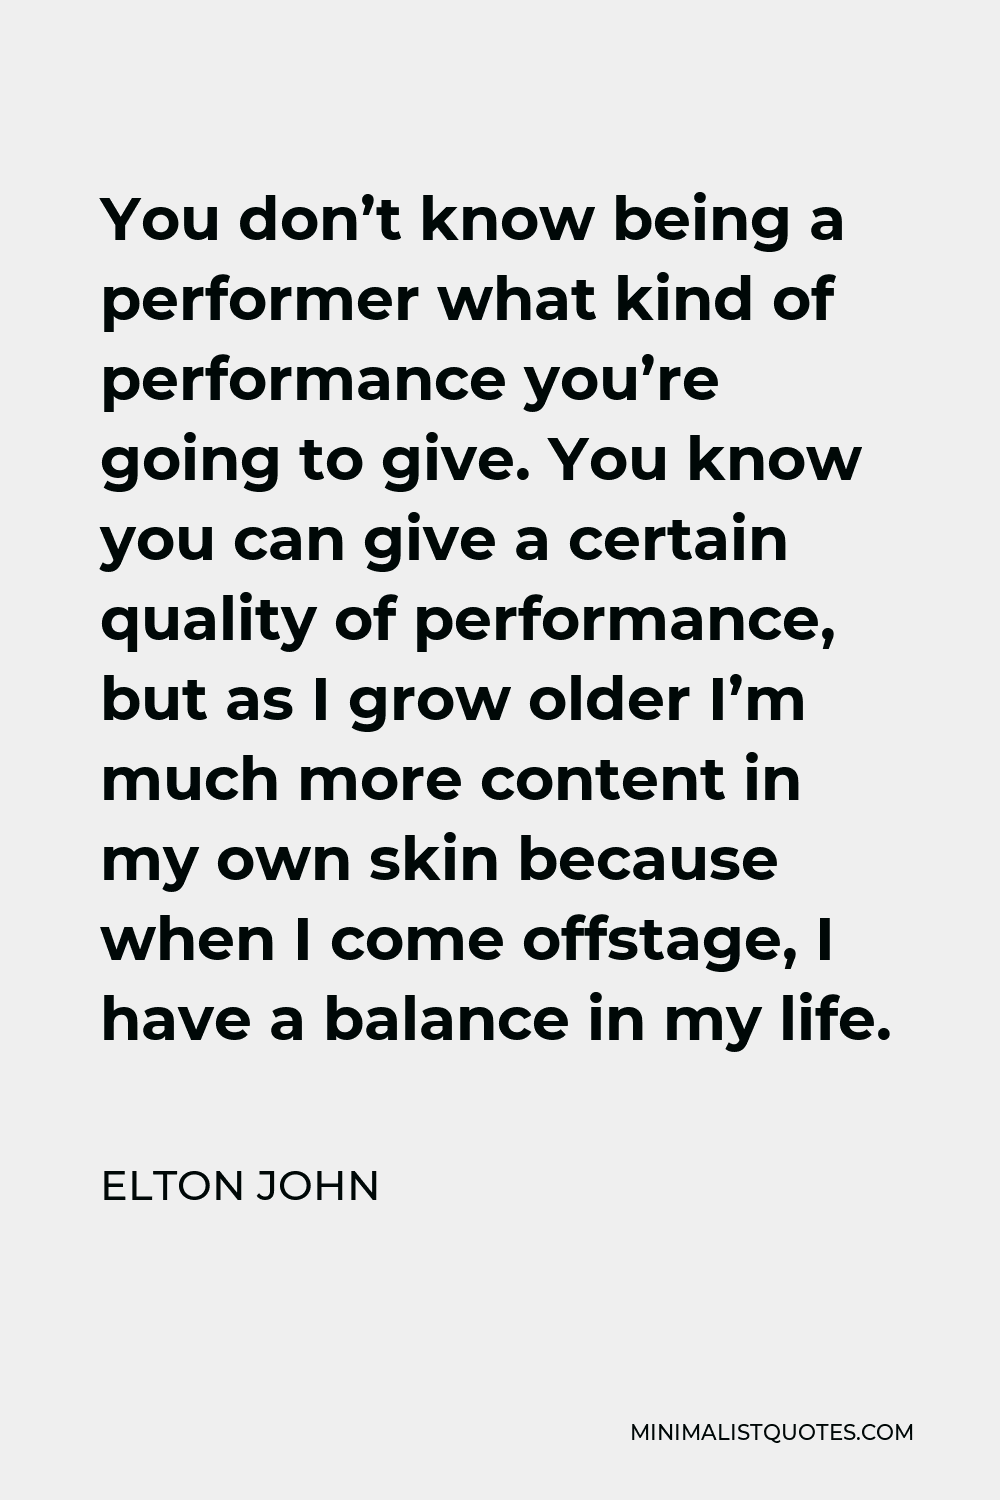 Elton John Quote You Don T Know Being A Performer What Kind Of Performance You Re Going To Give